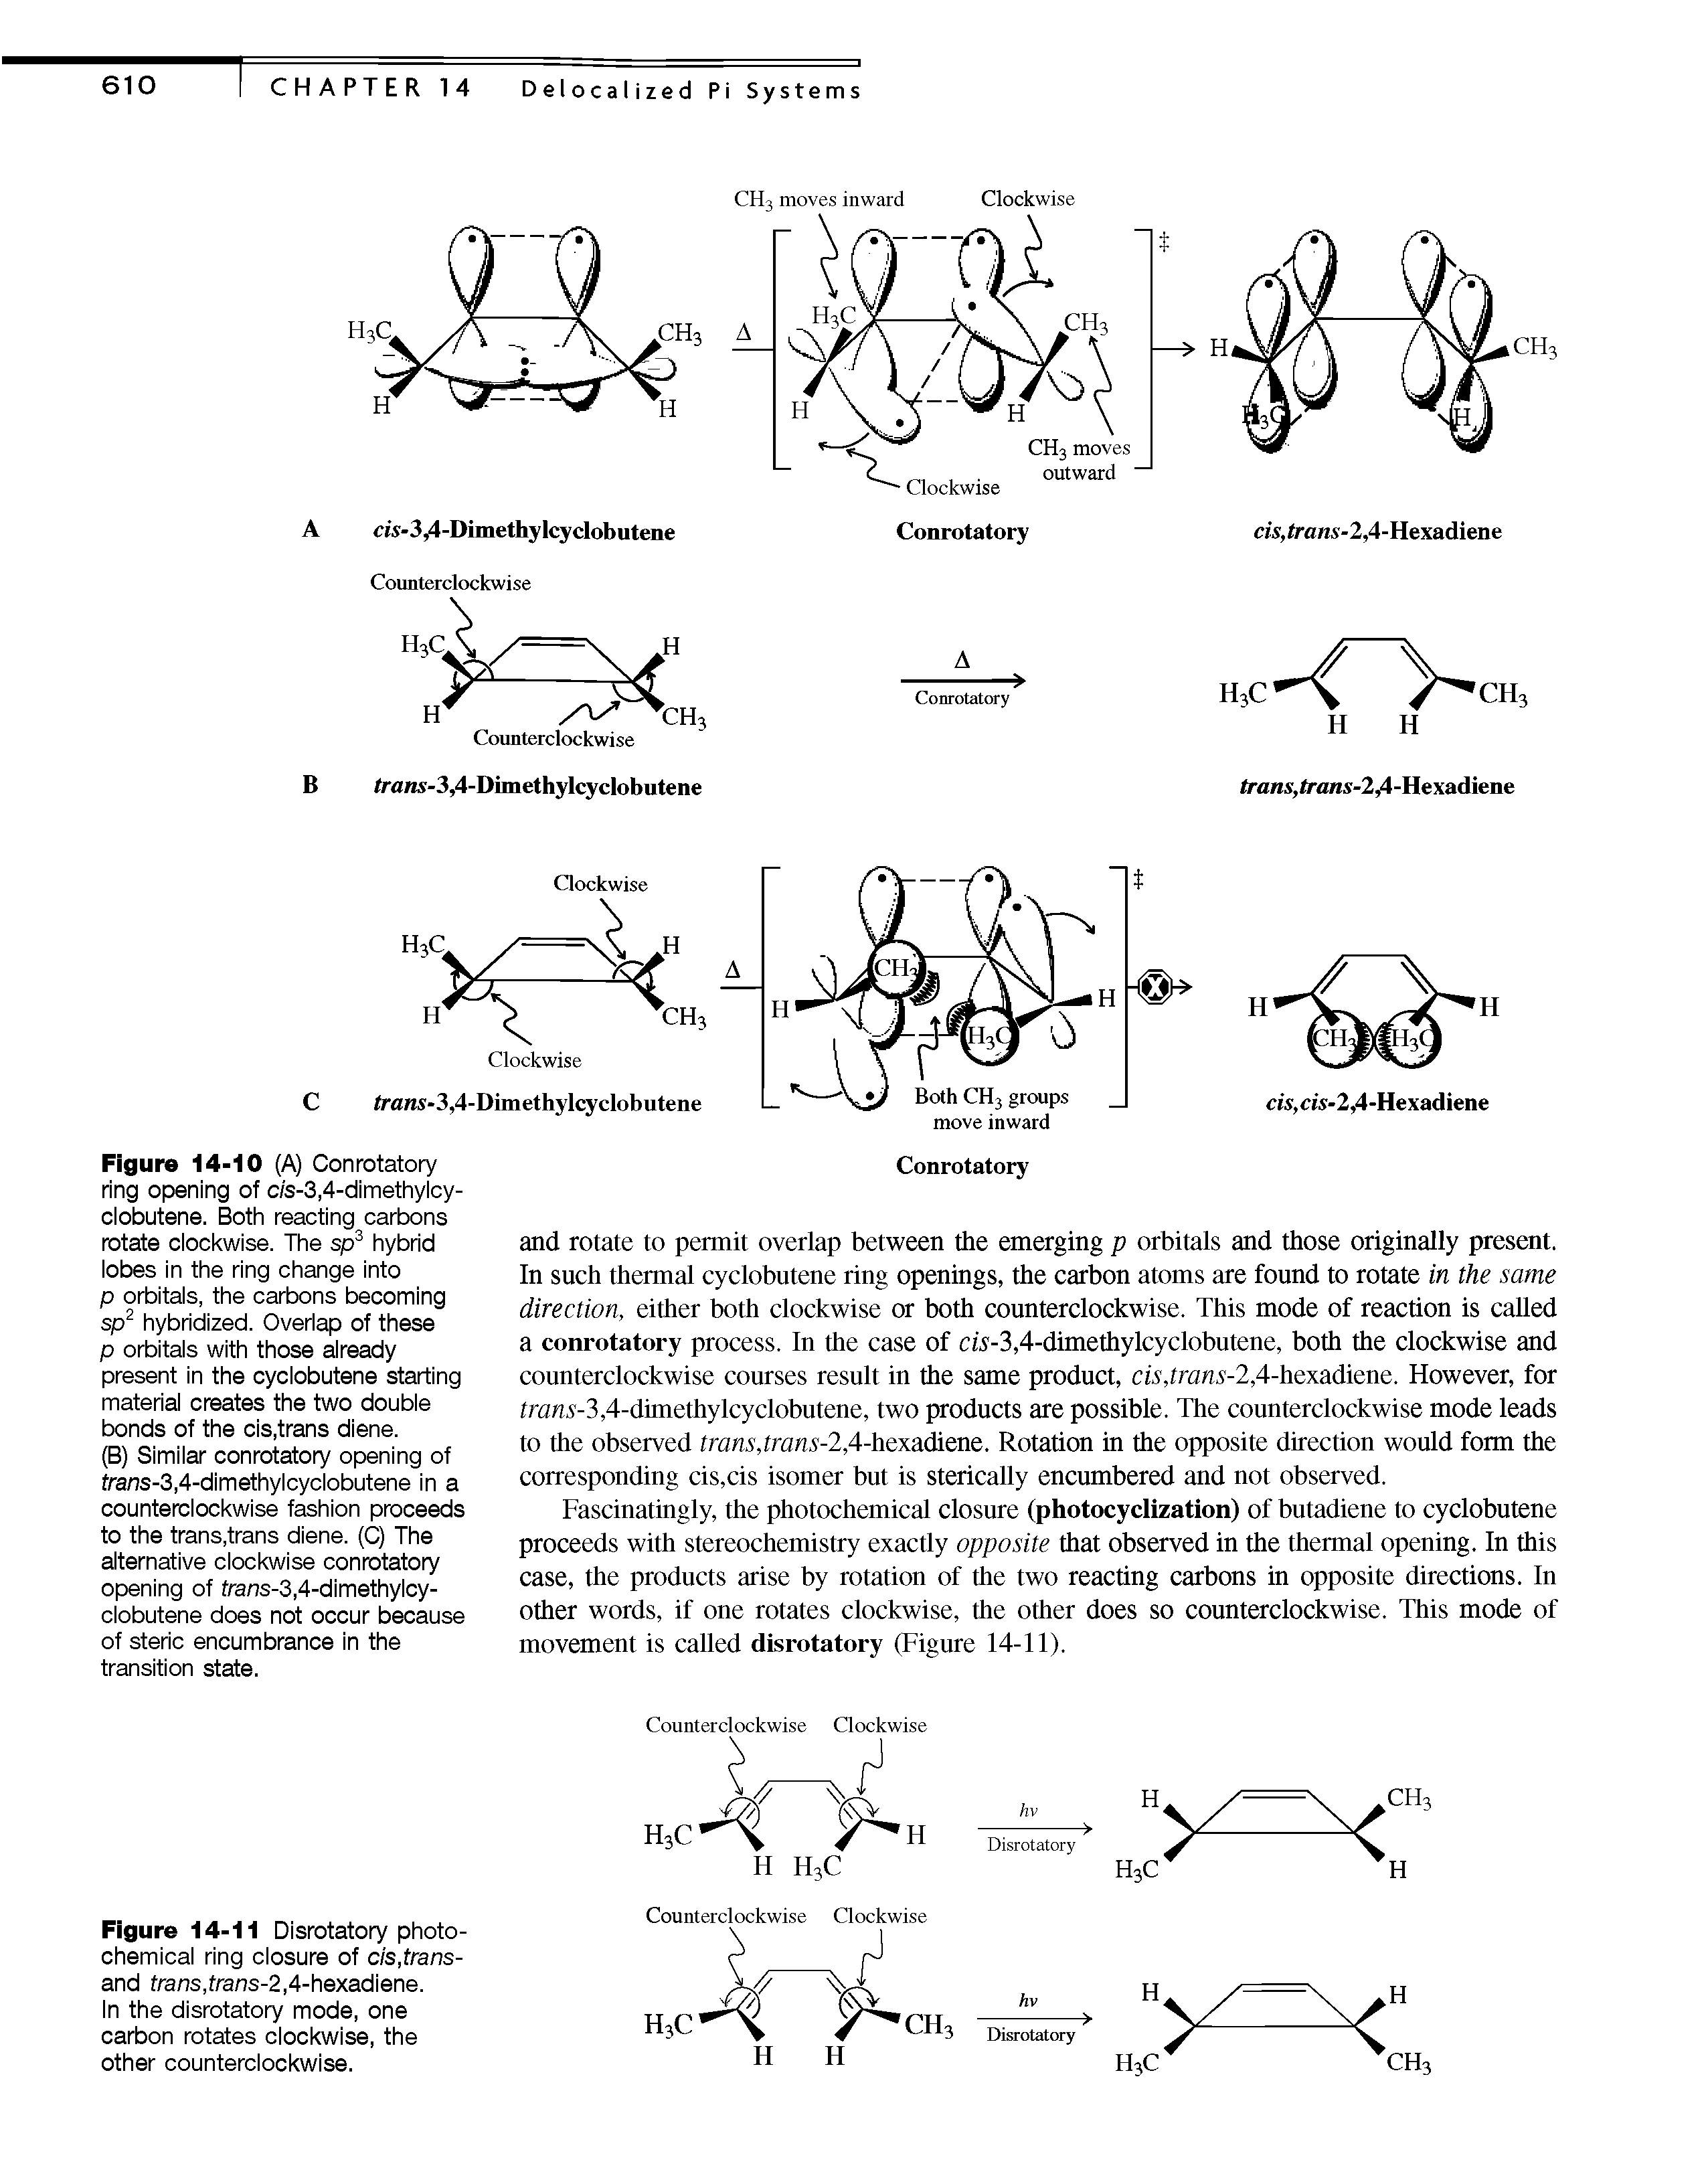 Figure 14-11 Disrotatory photochemical ring closure of cis,trans-and frans,frans-2,4-hexadiene.